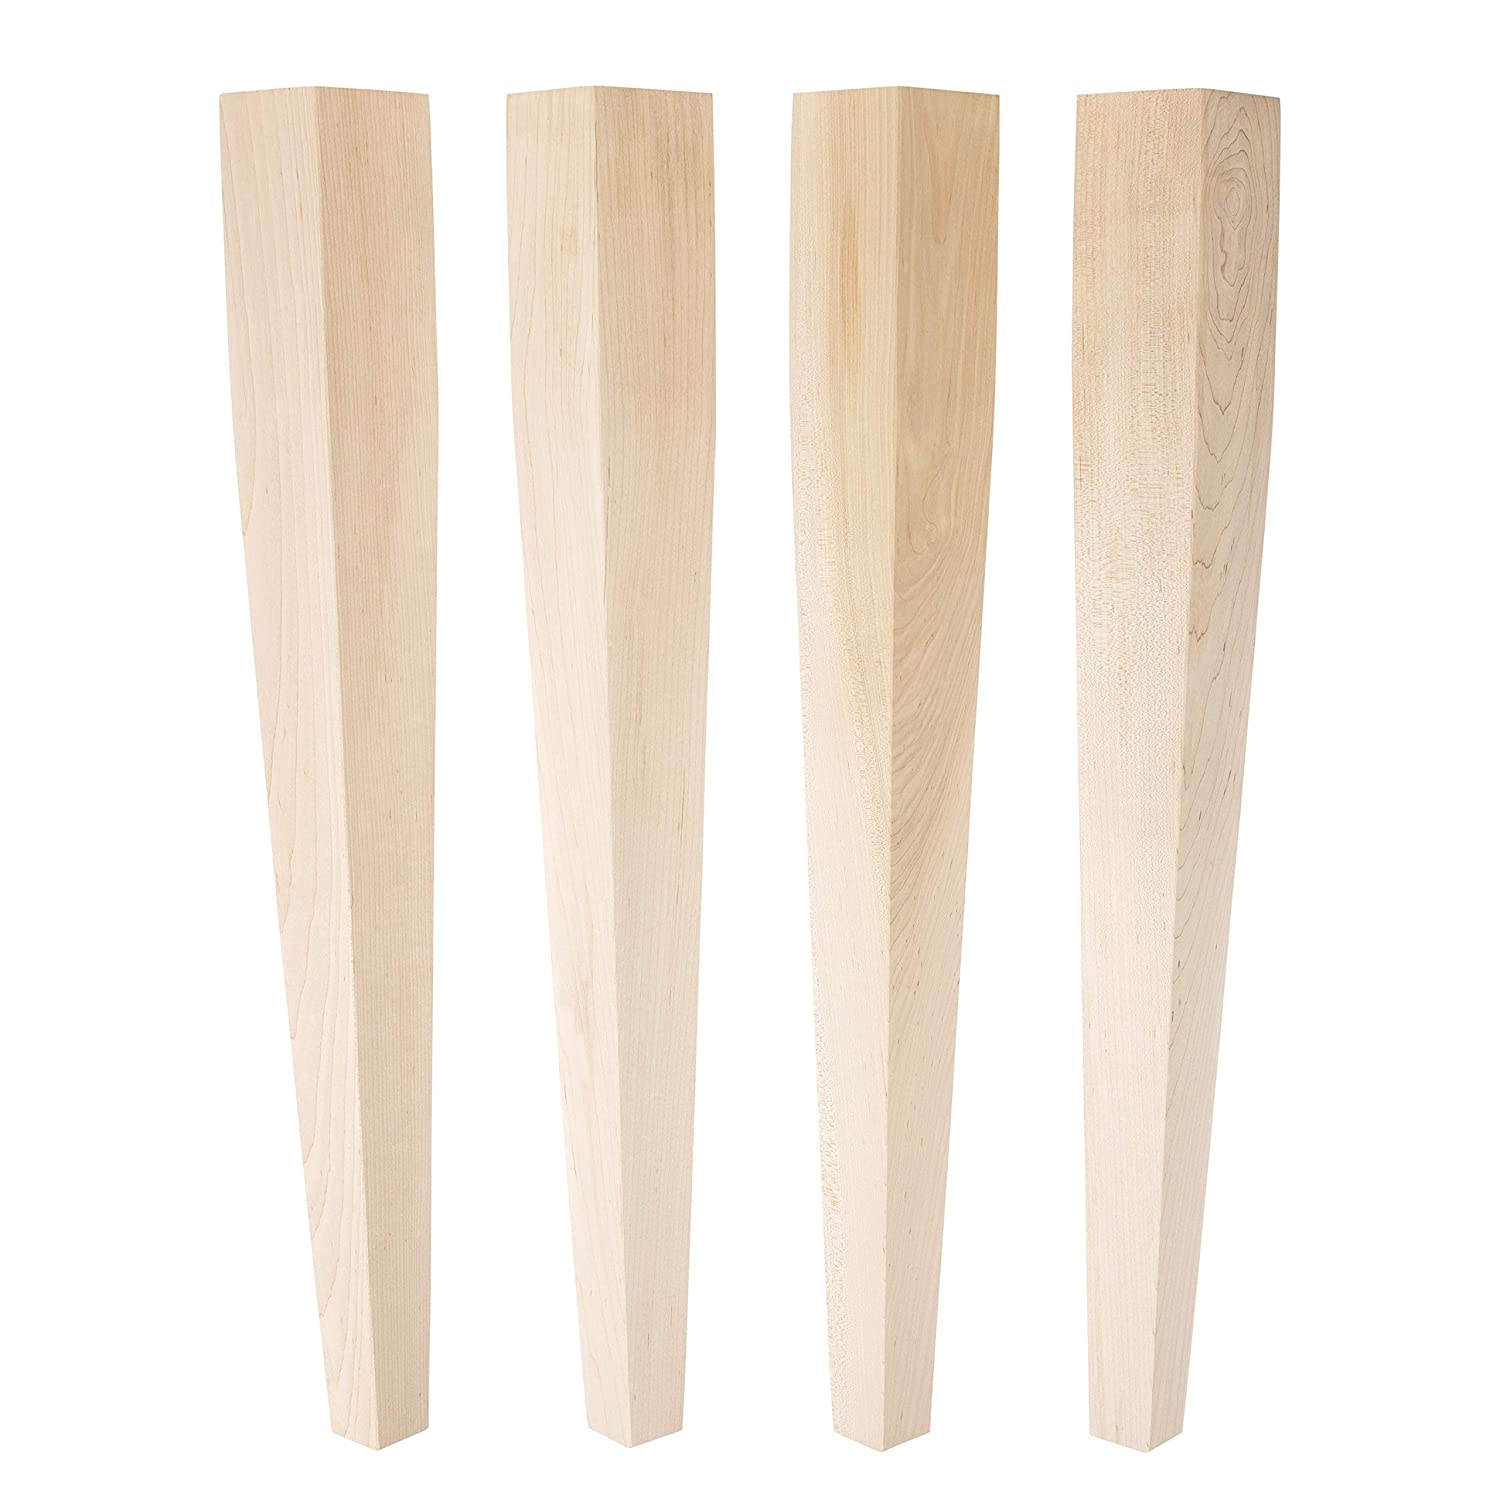 Maple Tapered Dining Legs - 3" x 29" by Carolina Leg Co